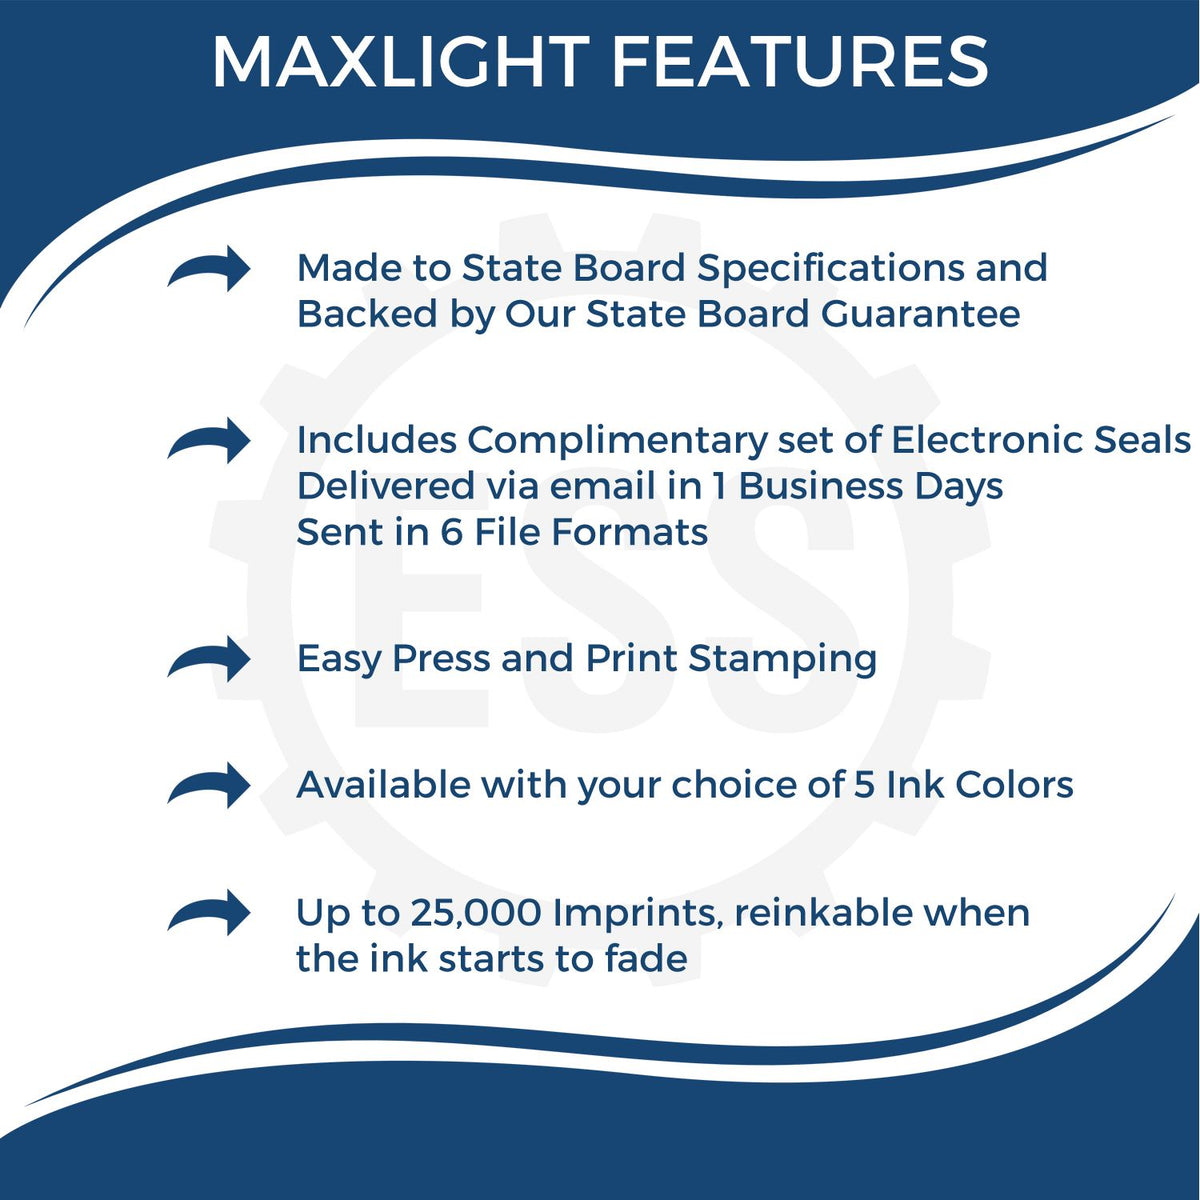 A picture of an infographic highlighting the selling points for the MaxLight Premium Pre-Inked Louisiana State Seal Notarial Stamp